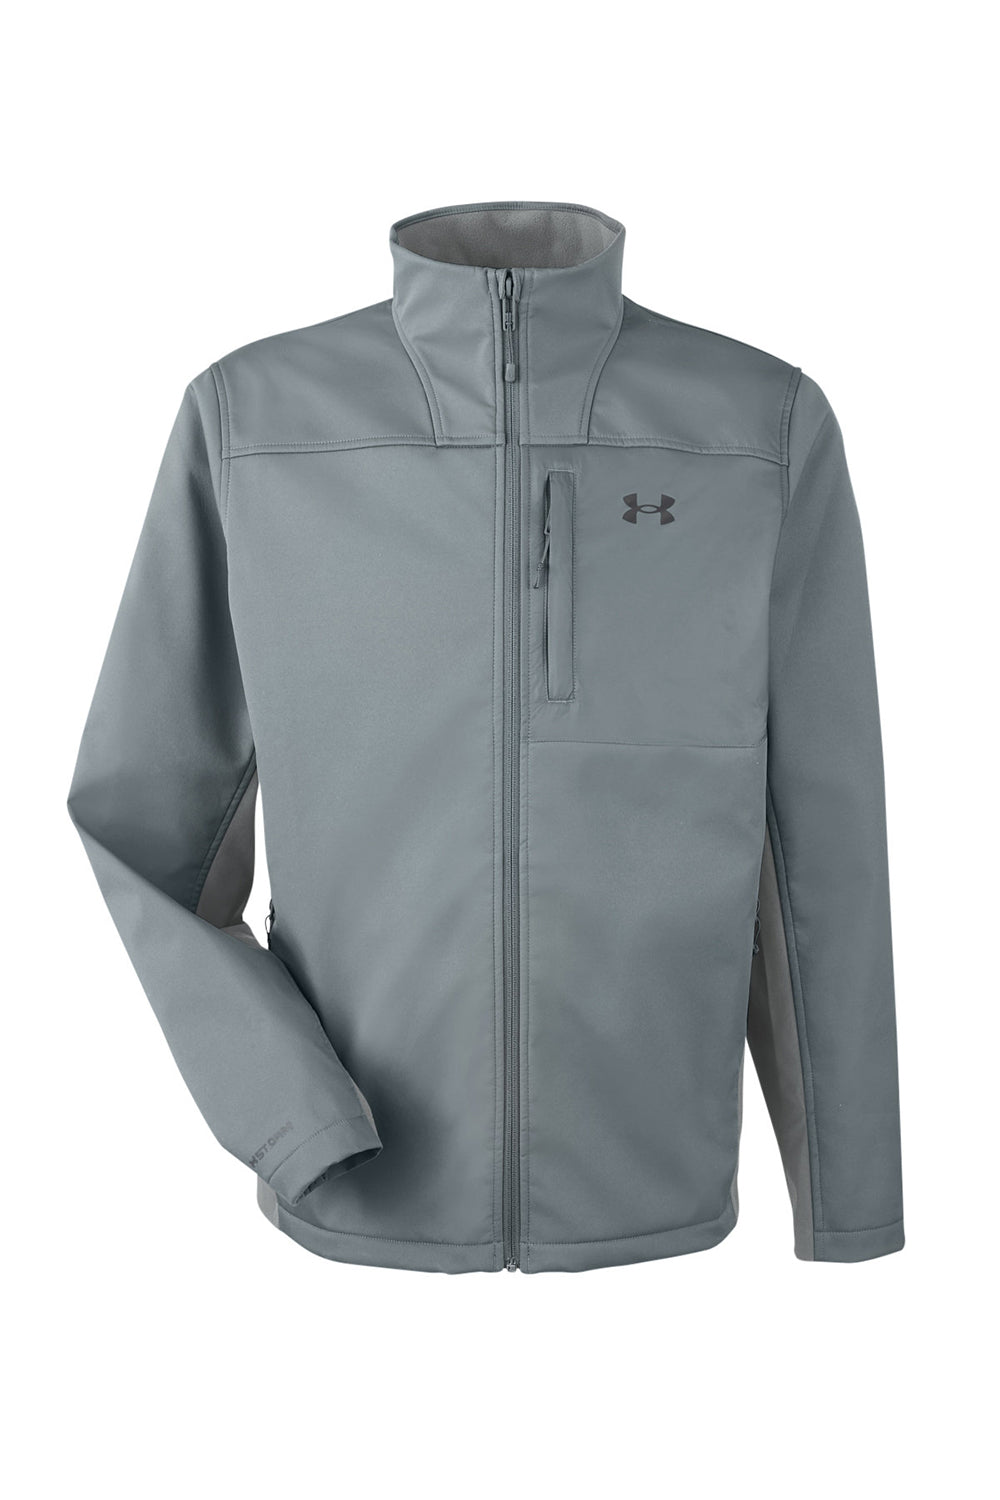 Under Armour 1371586 Mens ColdGear Infrared Shield 2.0 Windproof & Waterproof Full Zip Jacket Pitch Grey Flat Front